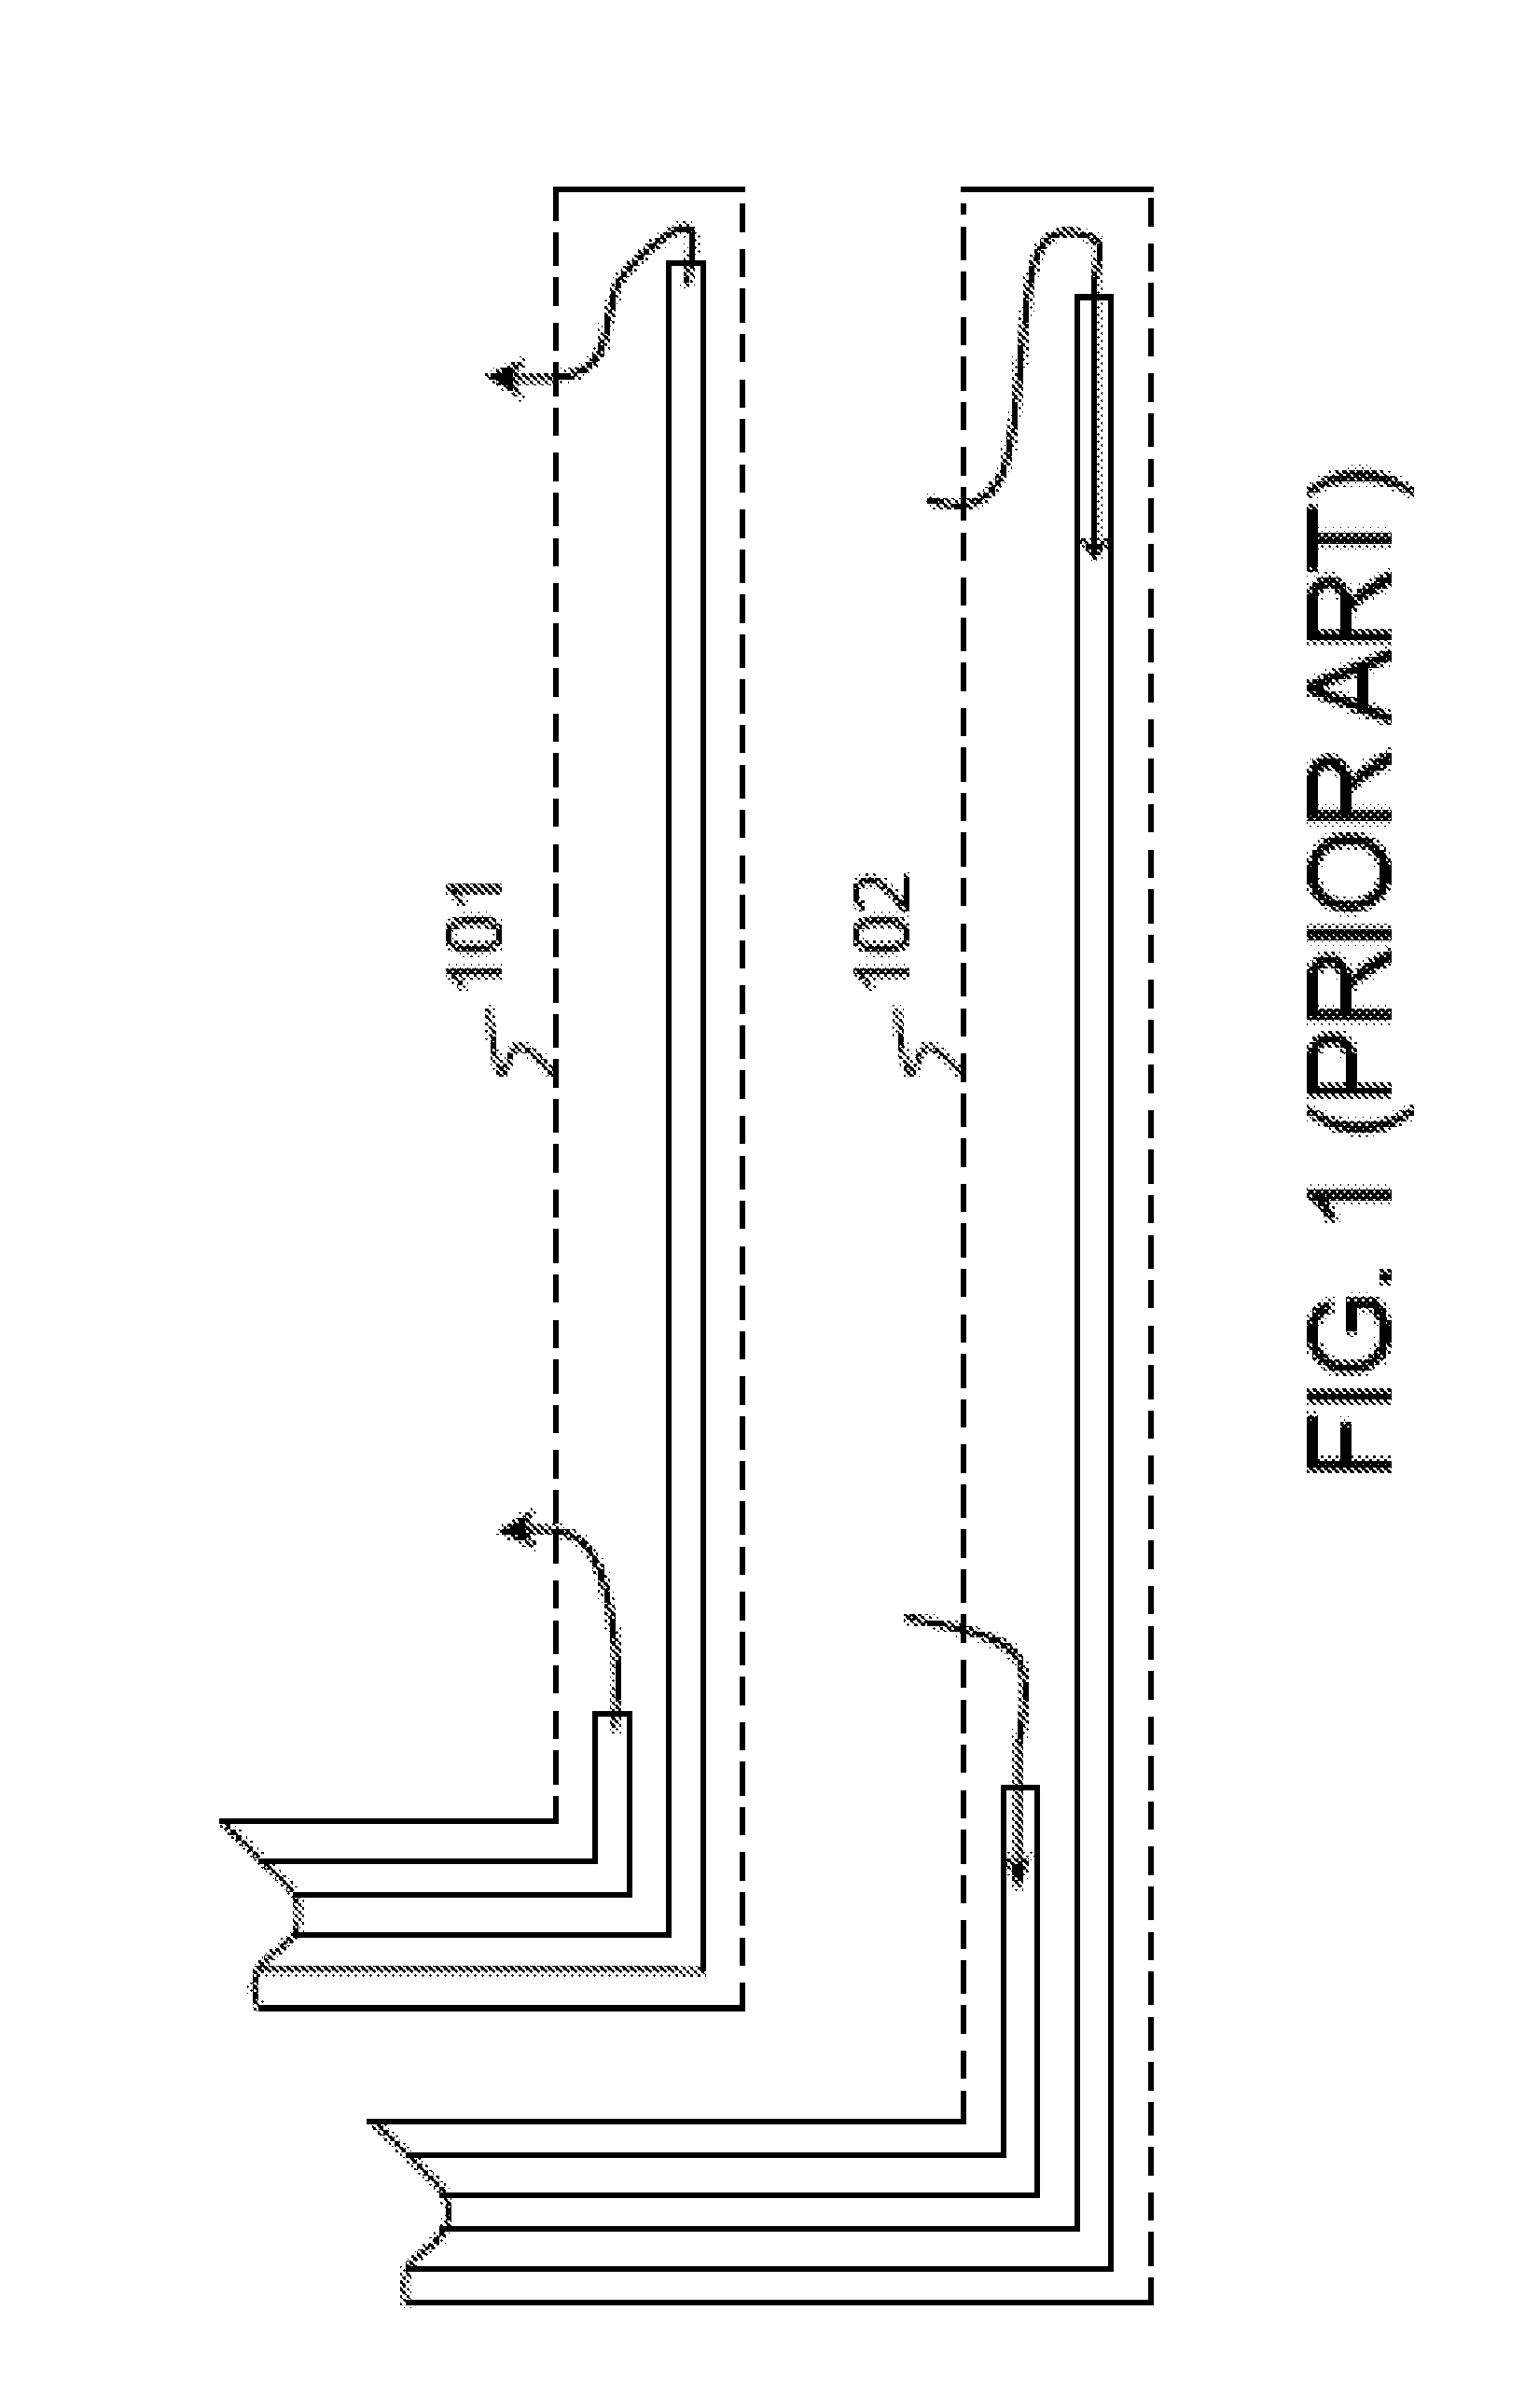 Producer snorkel or injector toe-dip to accelerate communication between SAGD producer and injector